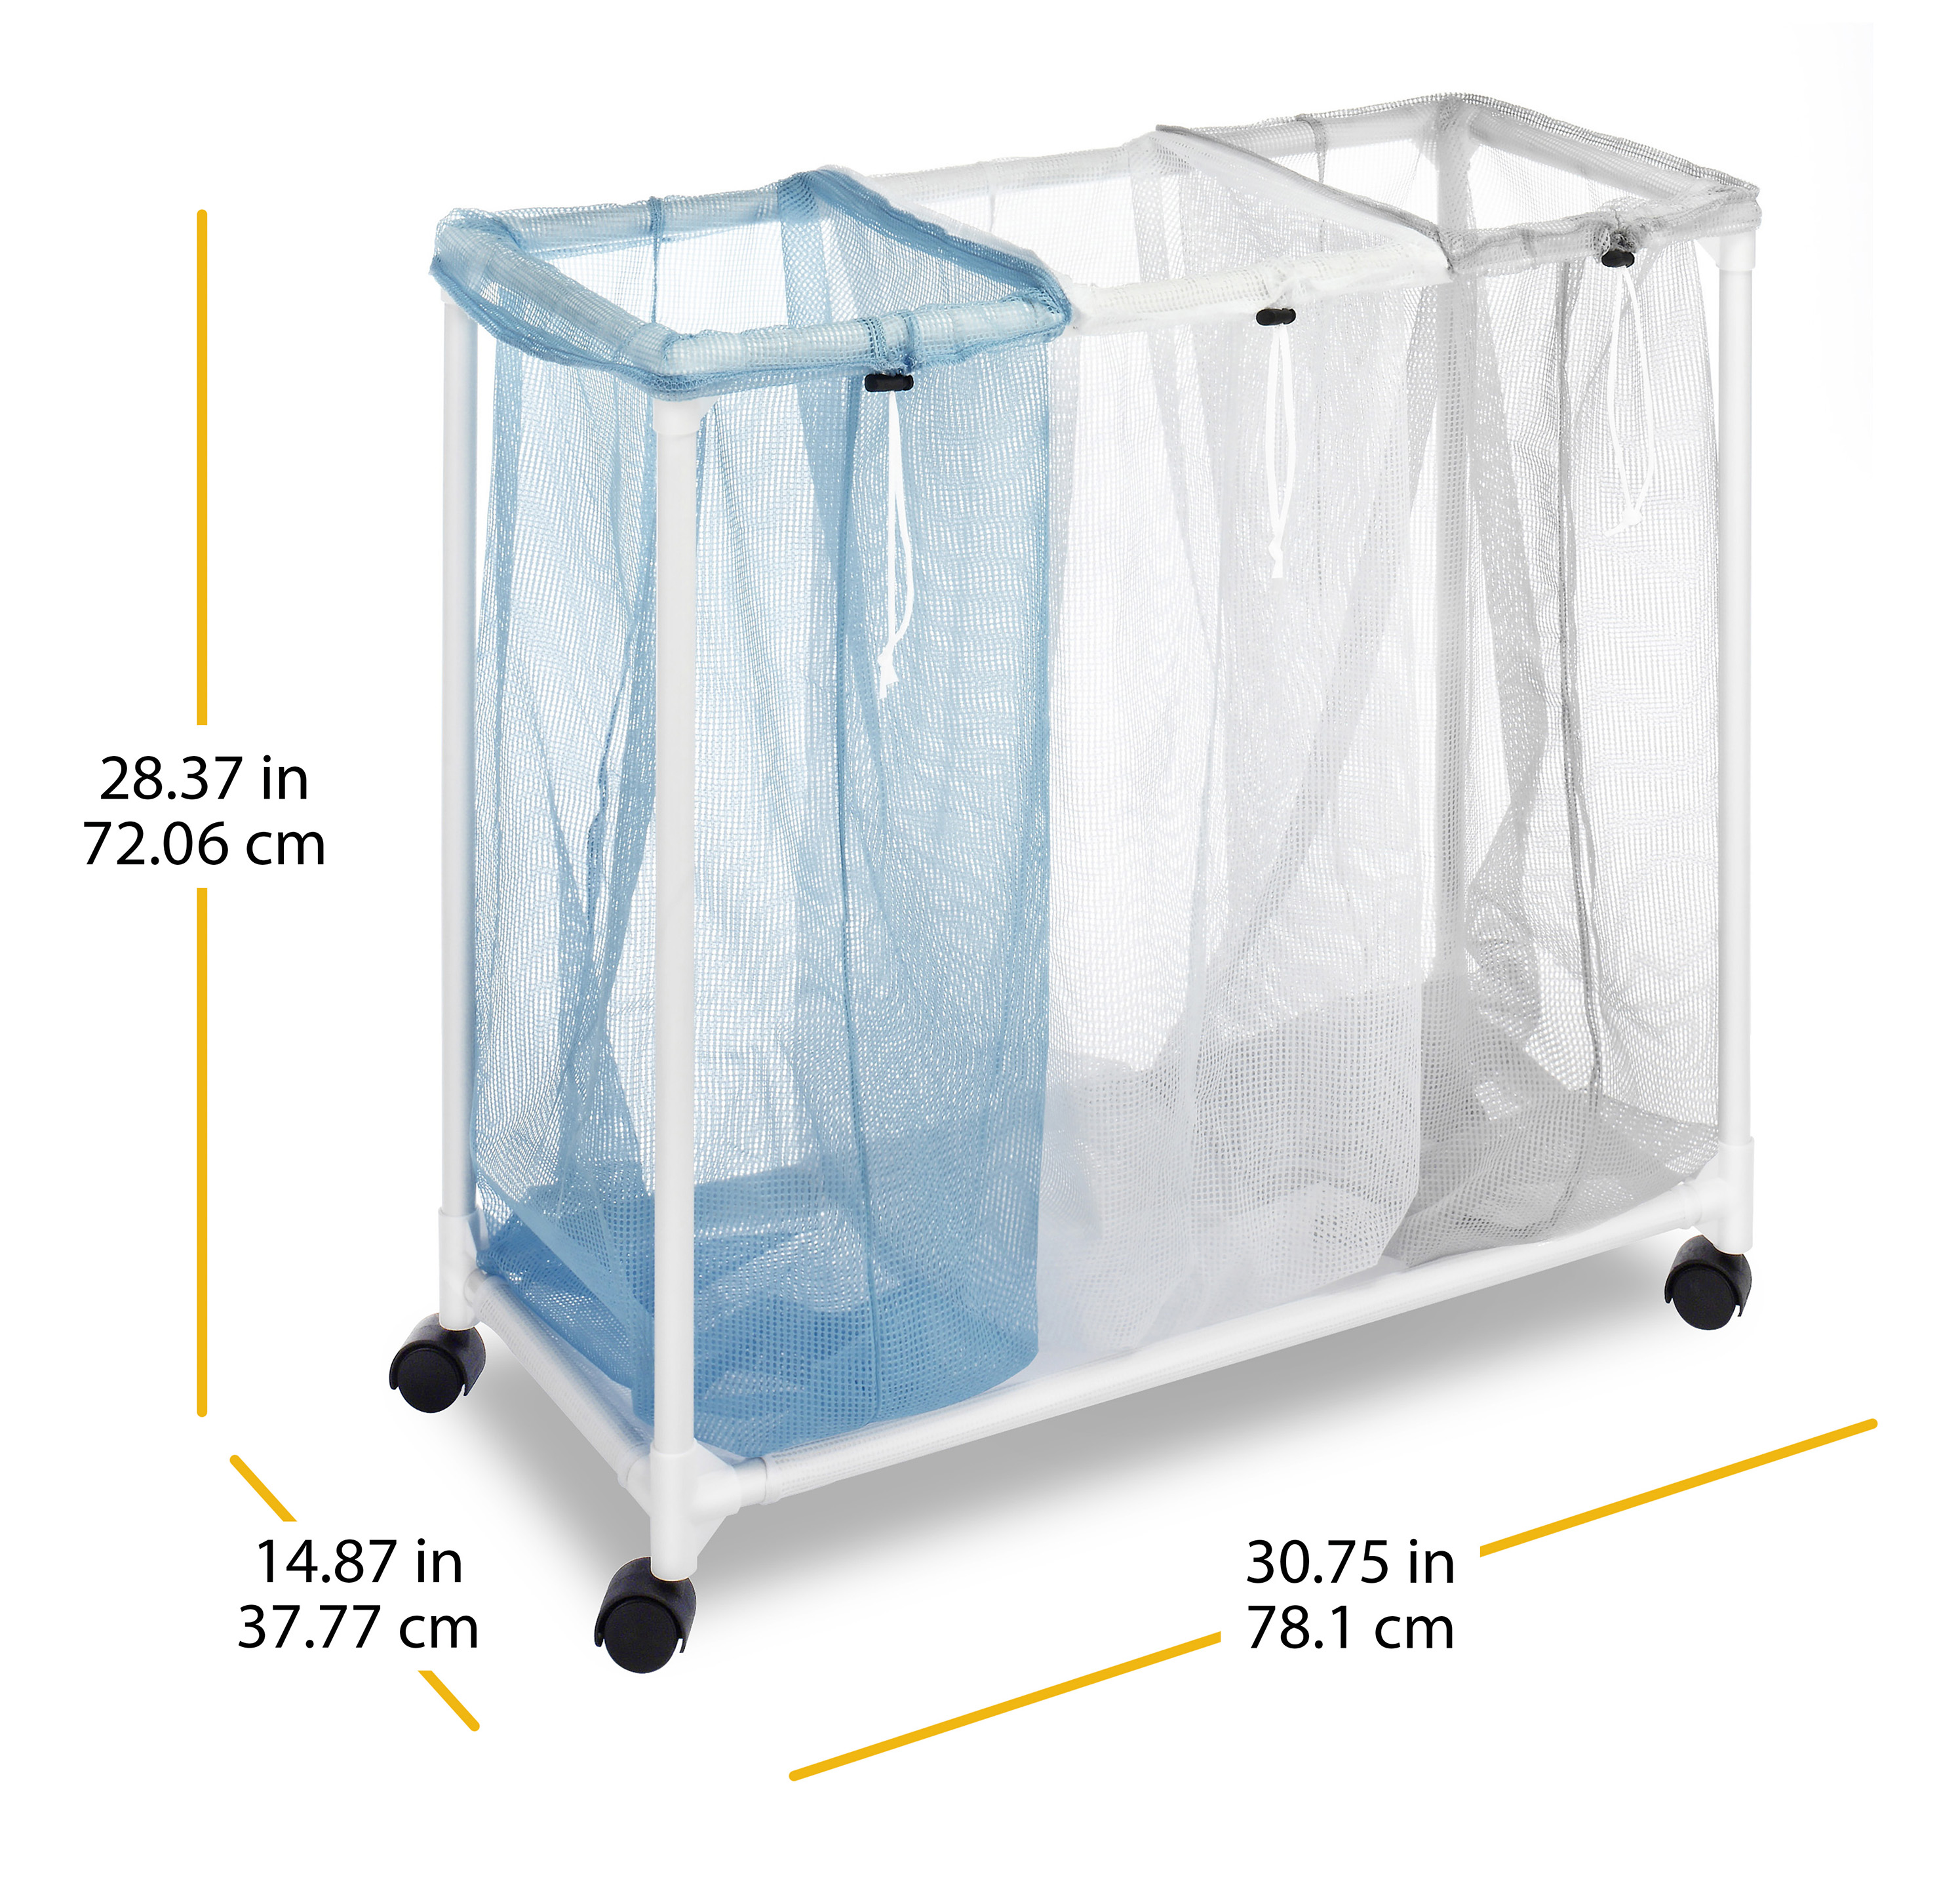 Whitmor Triple Mesh Bag Laundry Sorter, Clear and Blue - image 2 of 7